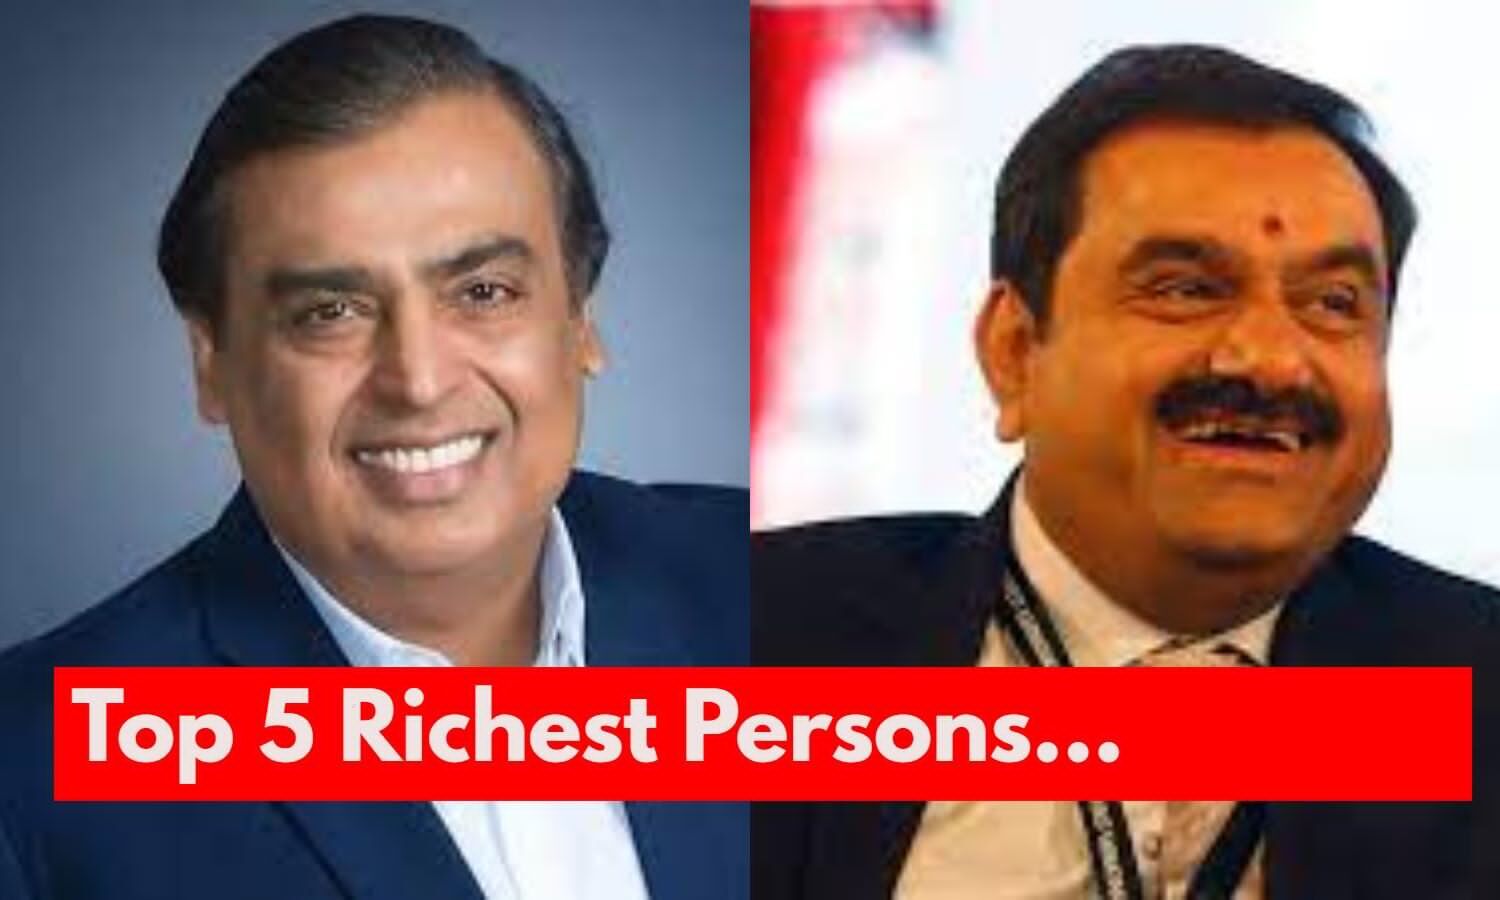 Top 5 Richest Persons: India’s 5 Richest People, Third Name Shocking